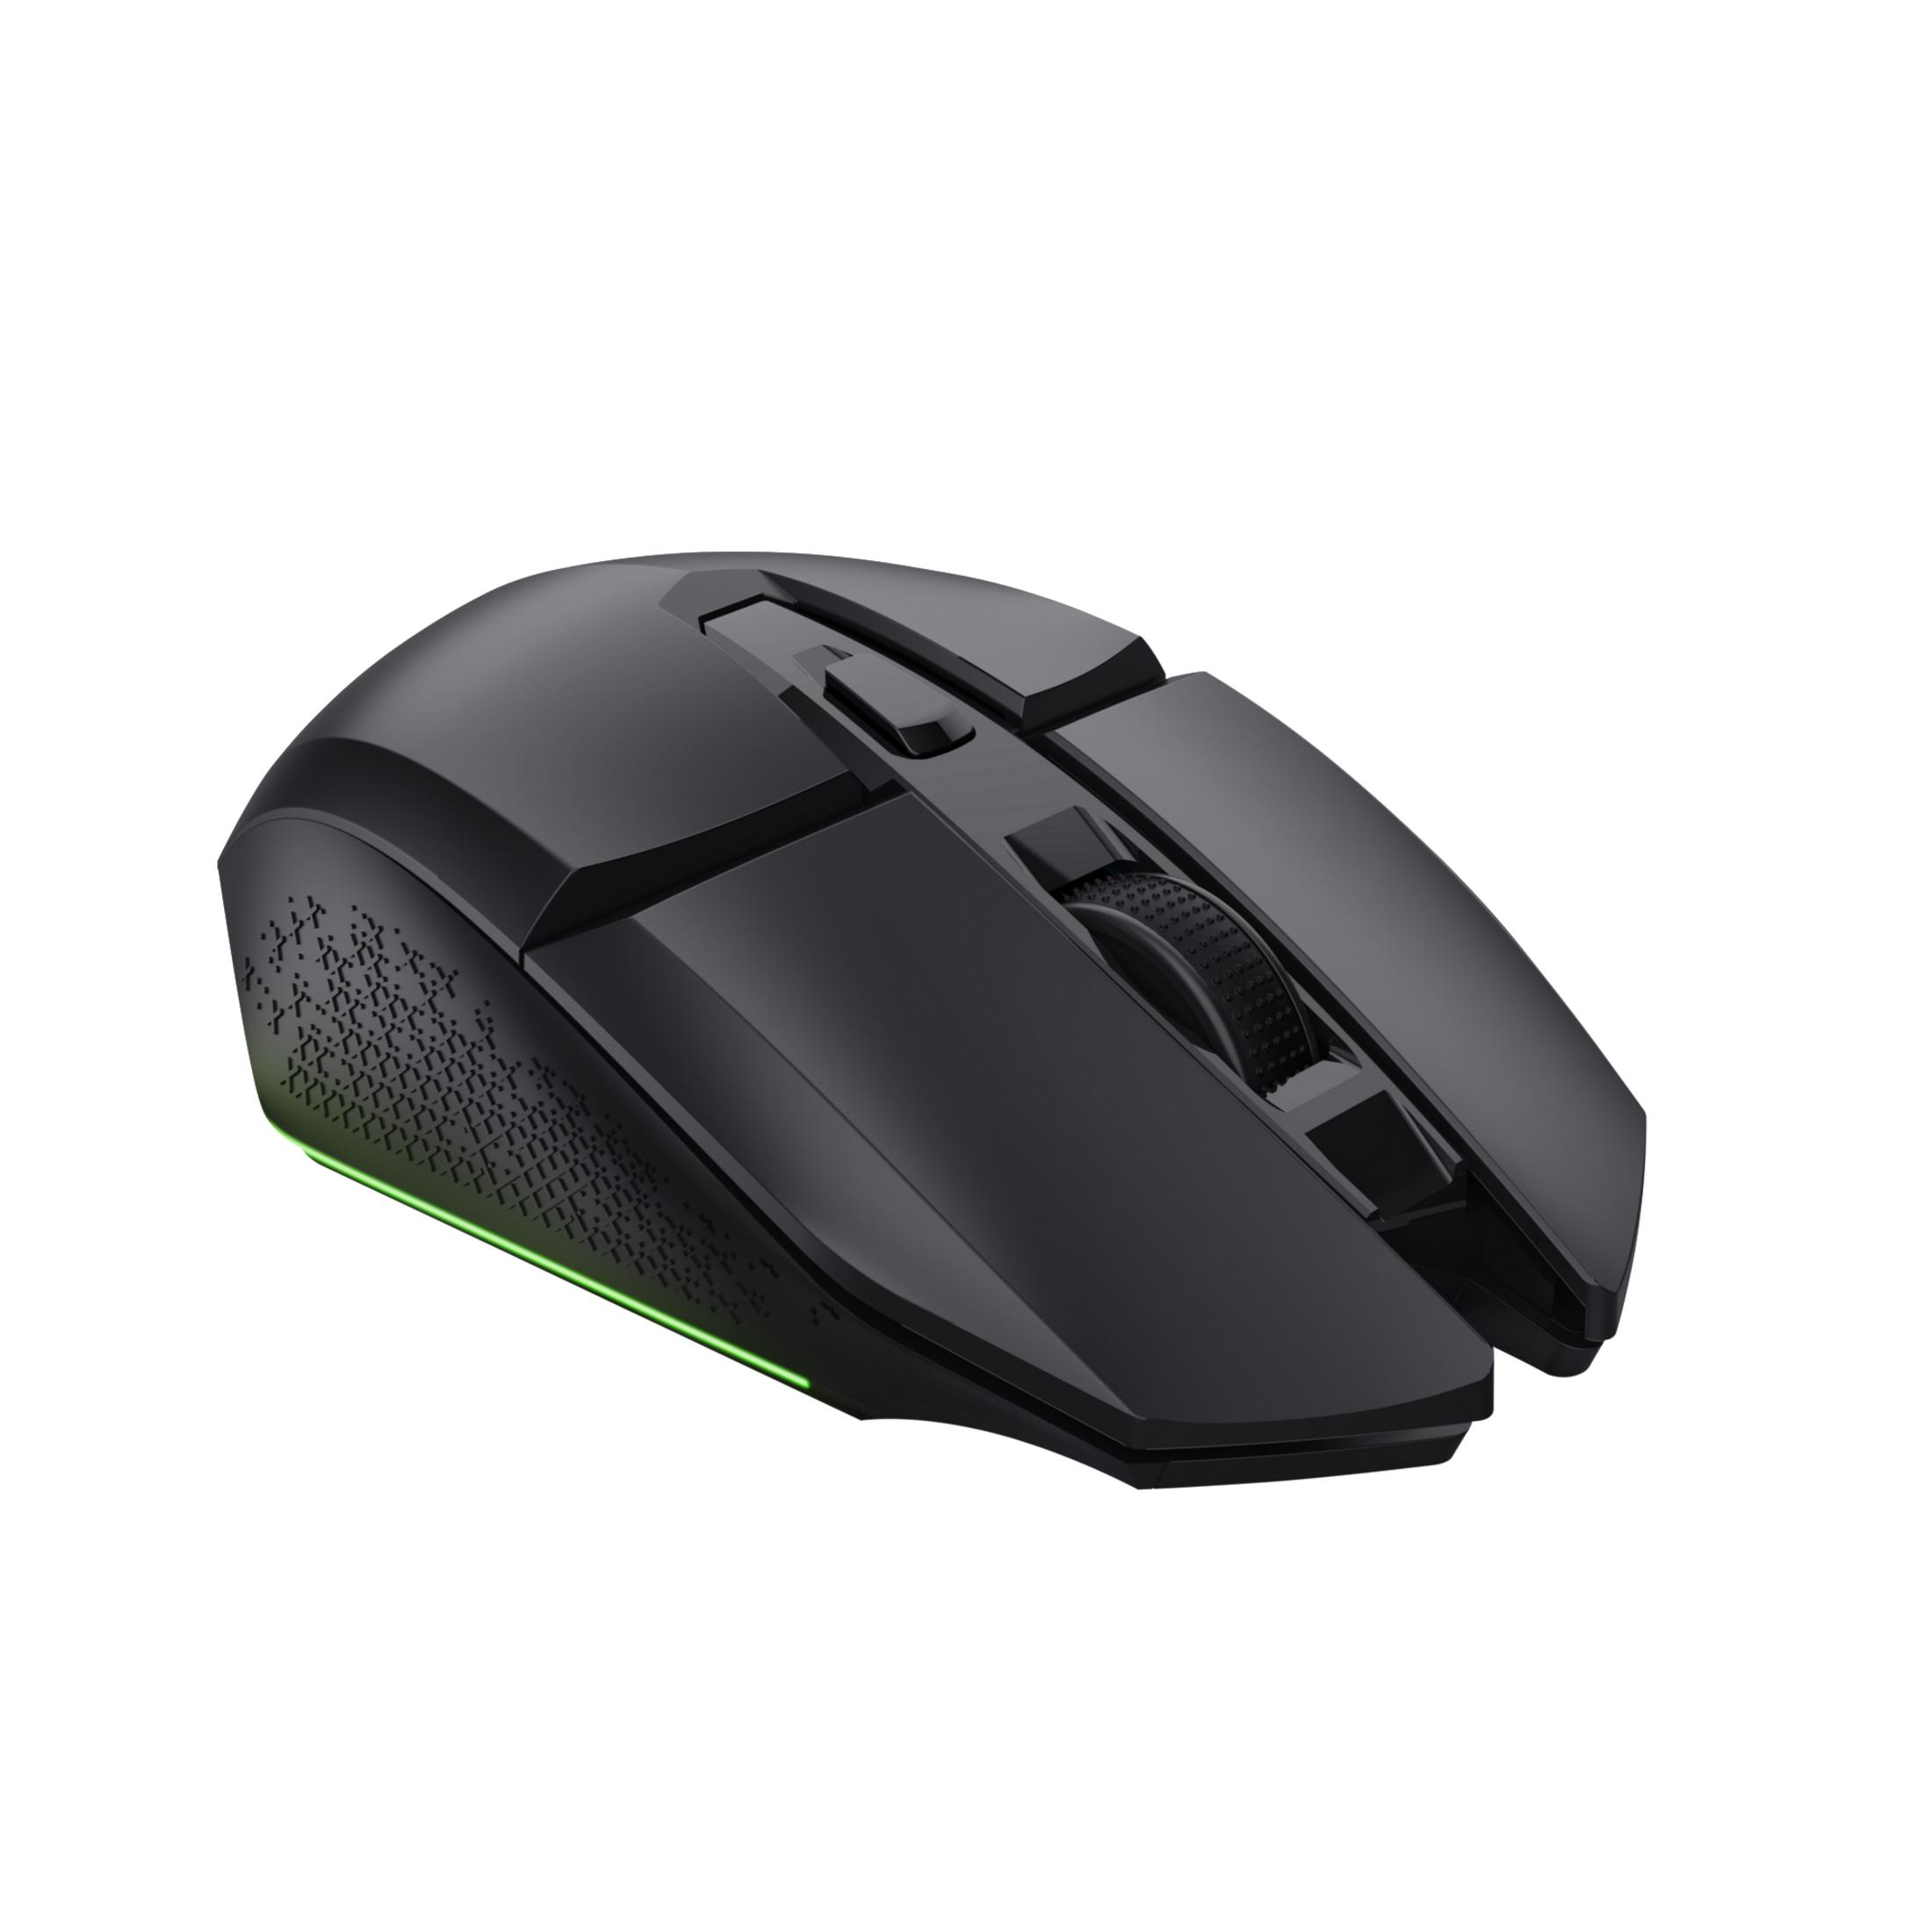 Booster FELOX Black Gaming 25037 MOUSE GXT110 BLACK WIRELESS Maus, TRUST